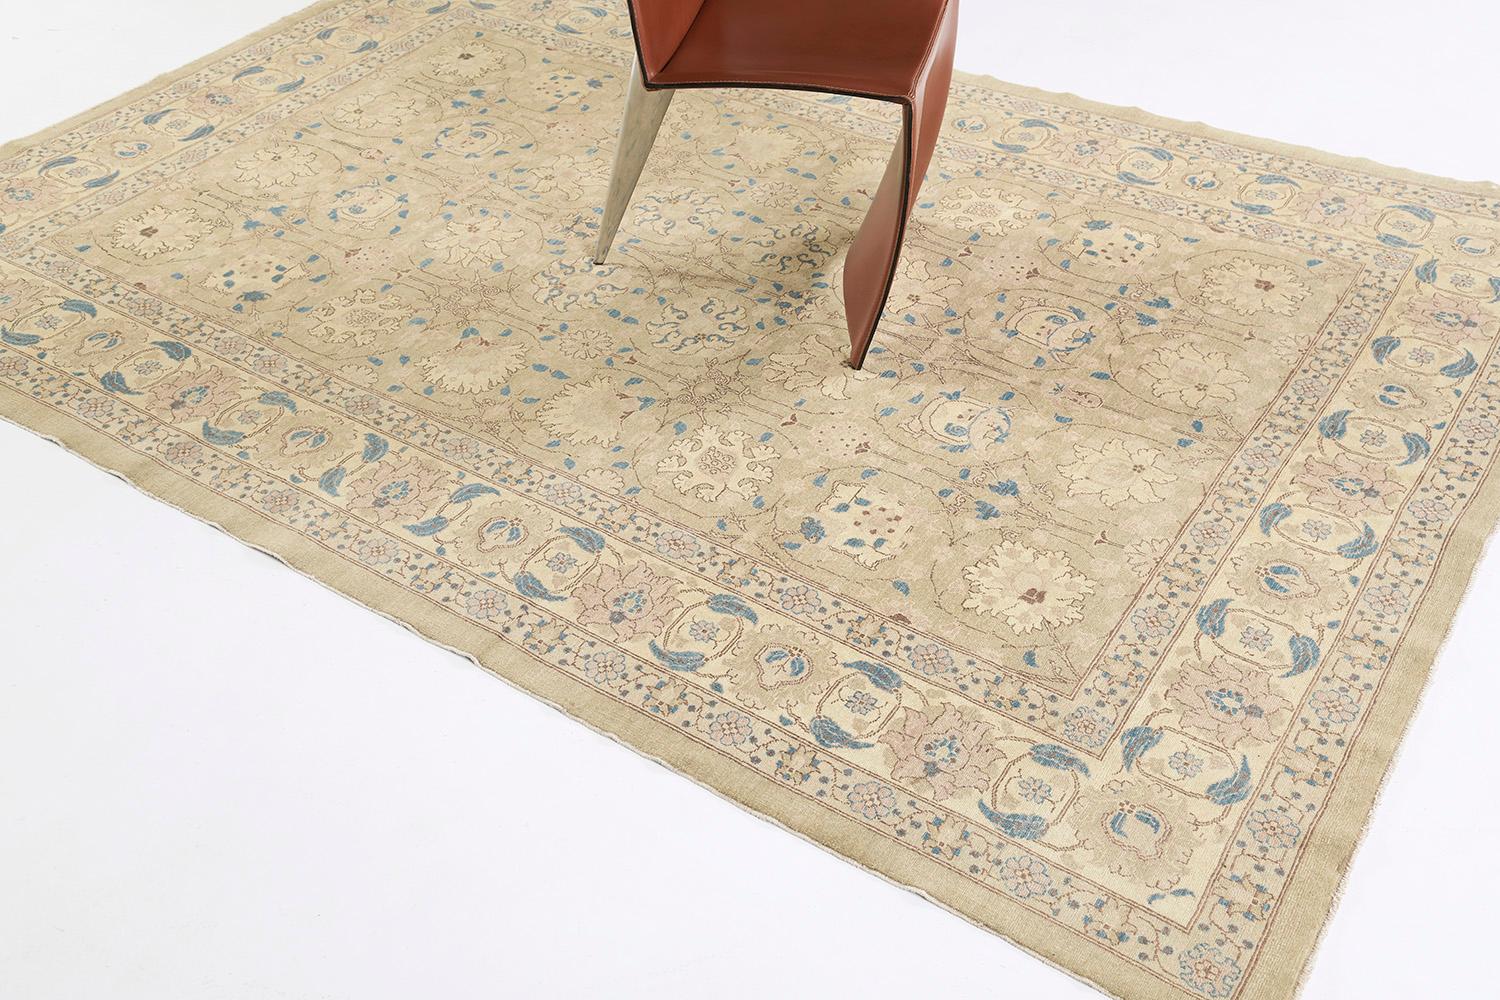 Natural Dye Classic Tabriz Design Rug, Fable Collection from Mehraban For Sale 4